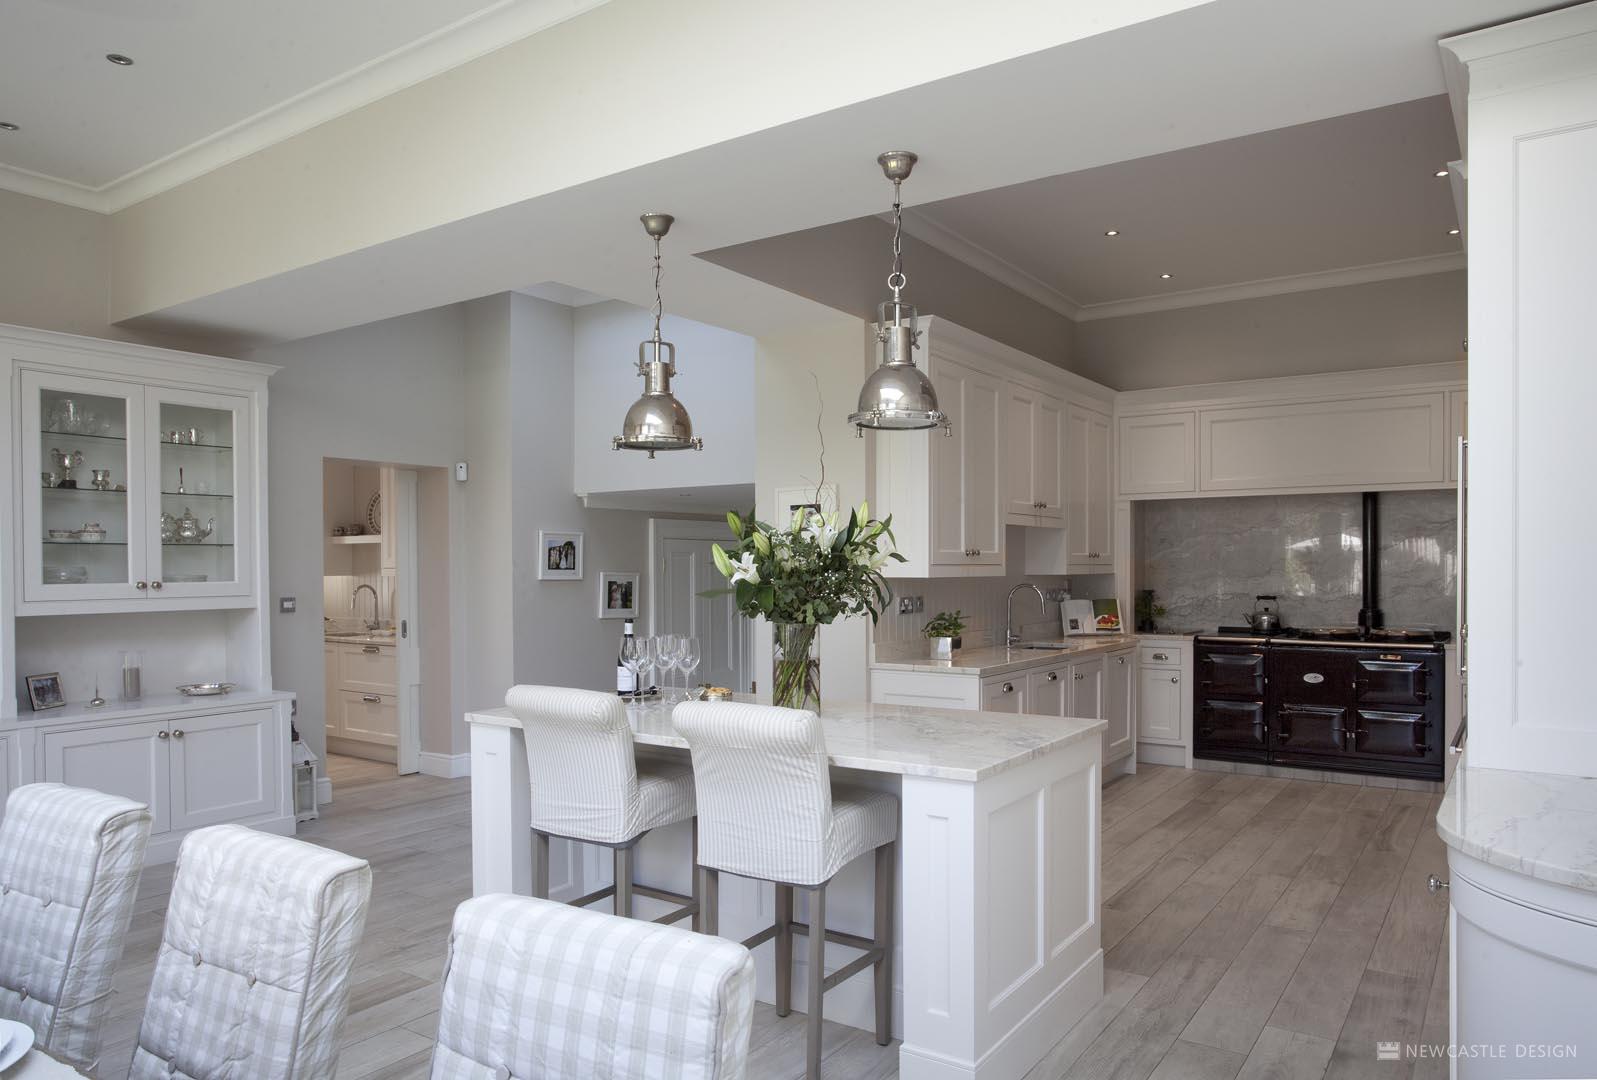 Kitchen Dining Room Designs   Get Inspired with Newcastle Design